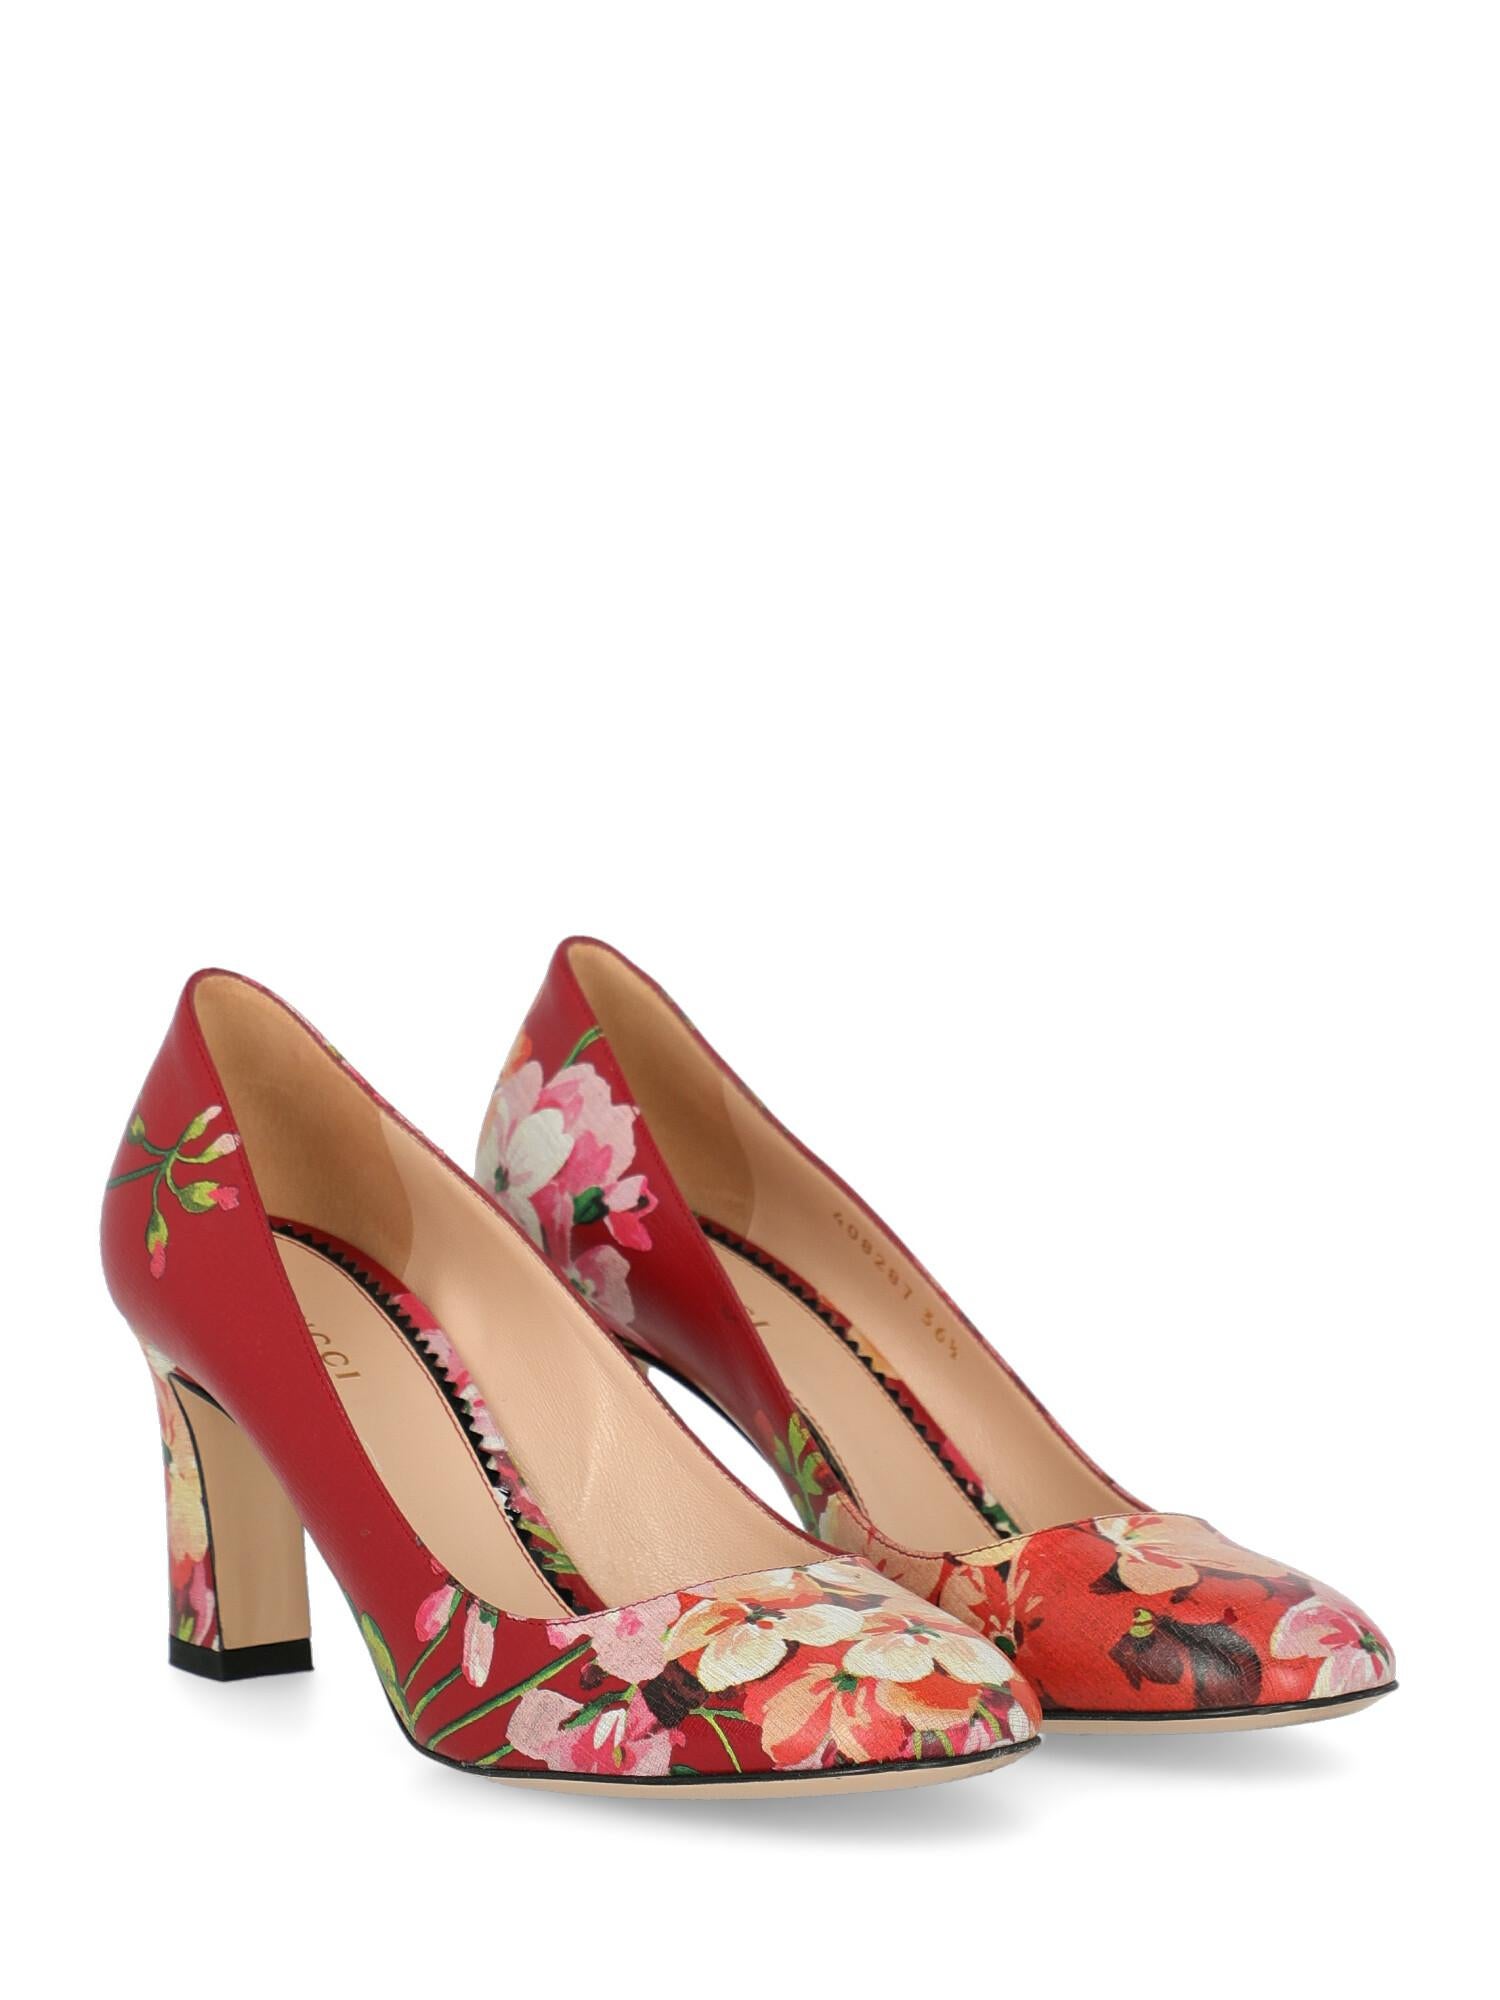 Shoe, leather, floral print, square toe, branded insole, block heel, mid heel.

Includes: N/A

Product Condition: Good
Sole: visible signs of use. Upper: slightly visible stains. Insole: generic residues, visible glue stain.

Measurements:
Height: 7